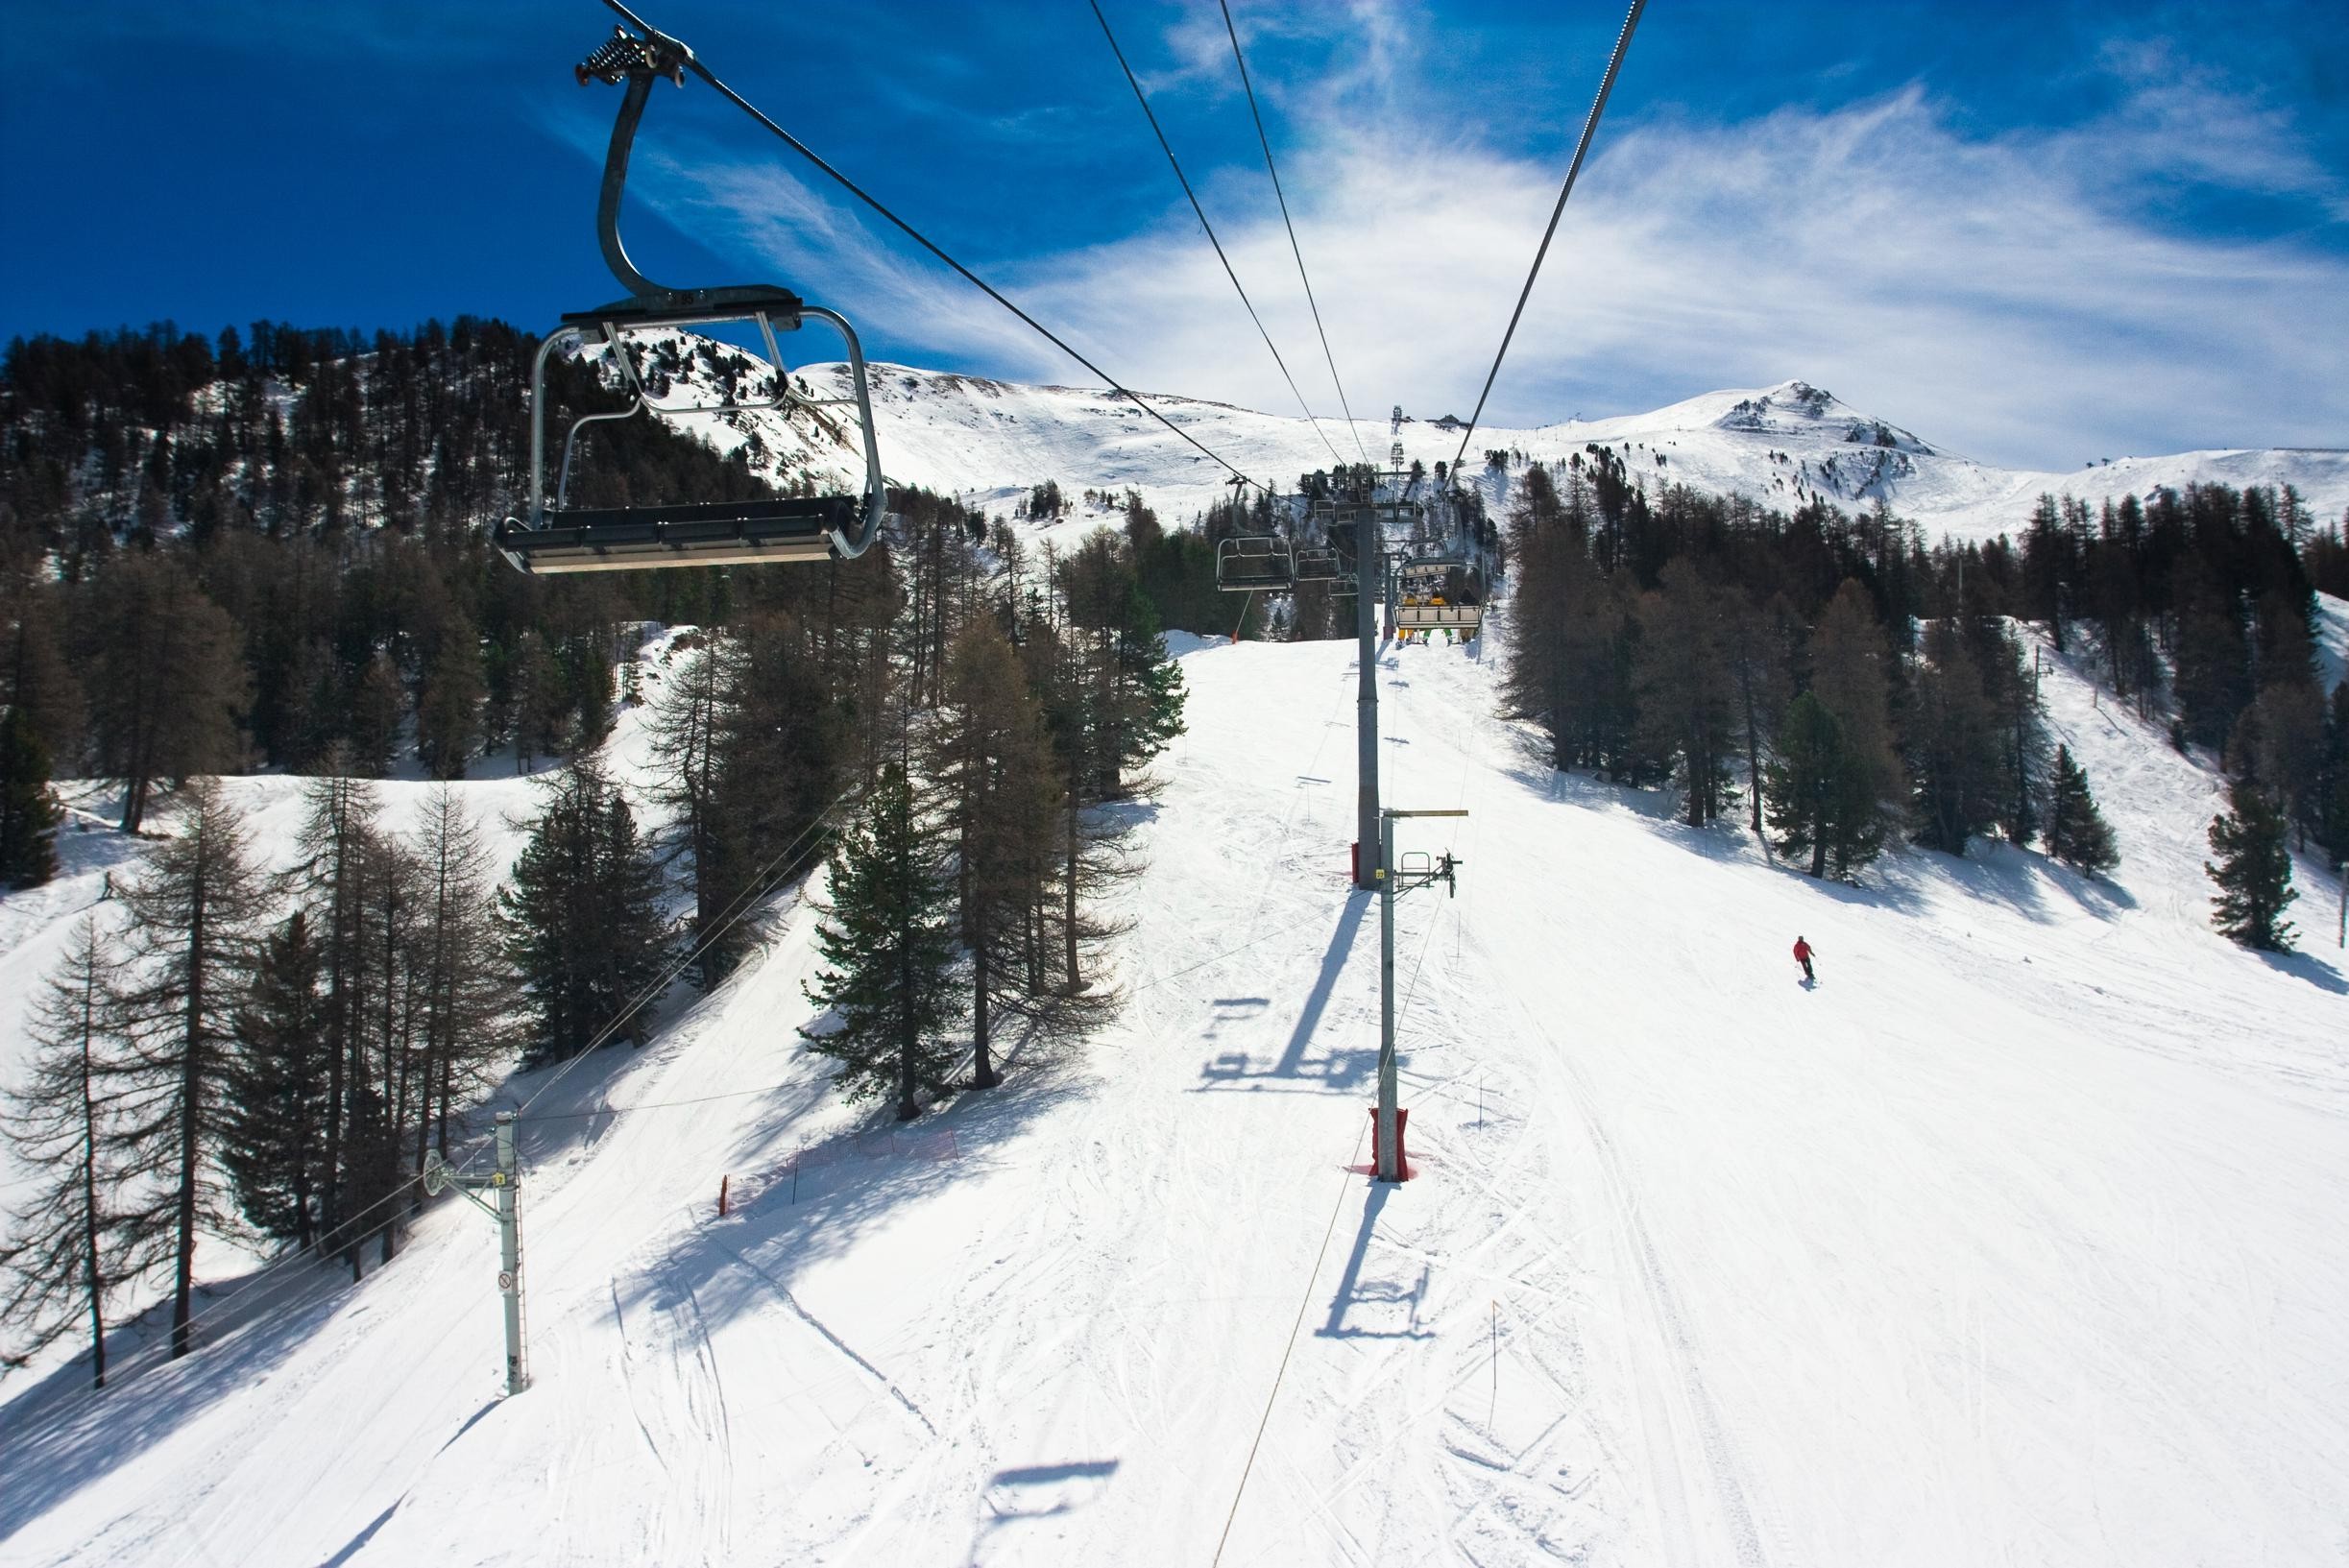 Trembling and vomiting: Dutch students hospitalized after après – ski in France